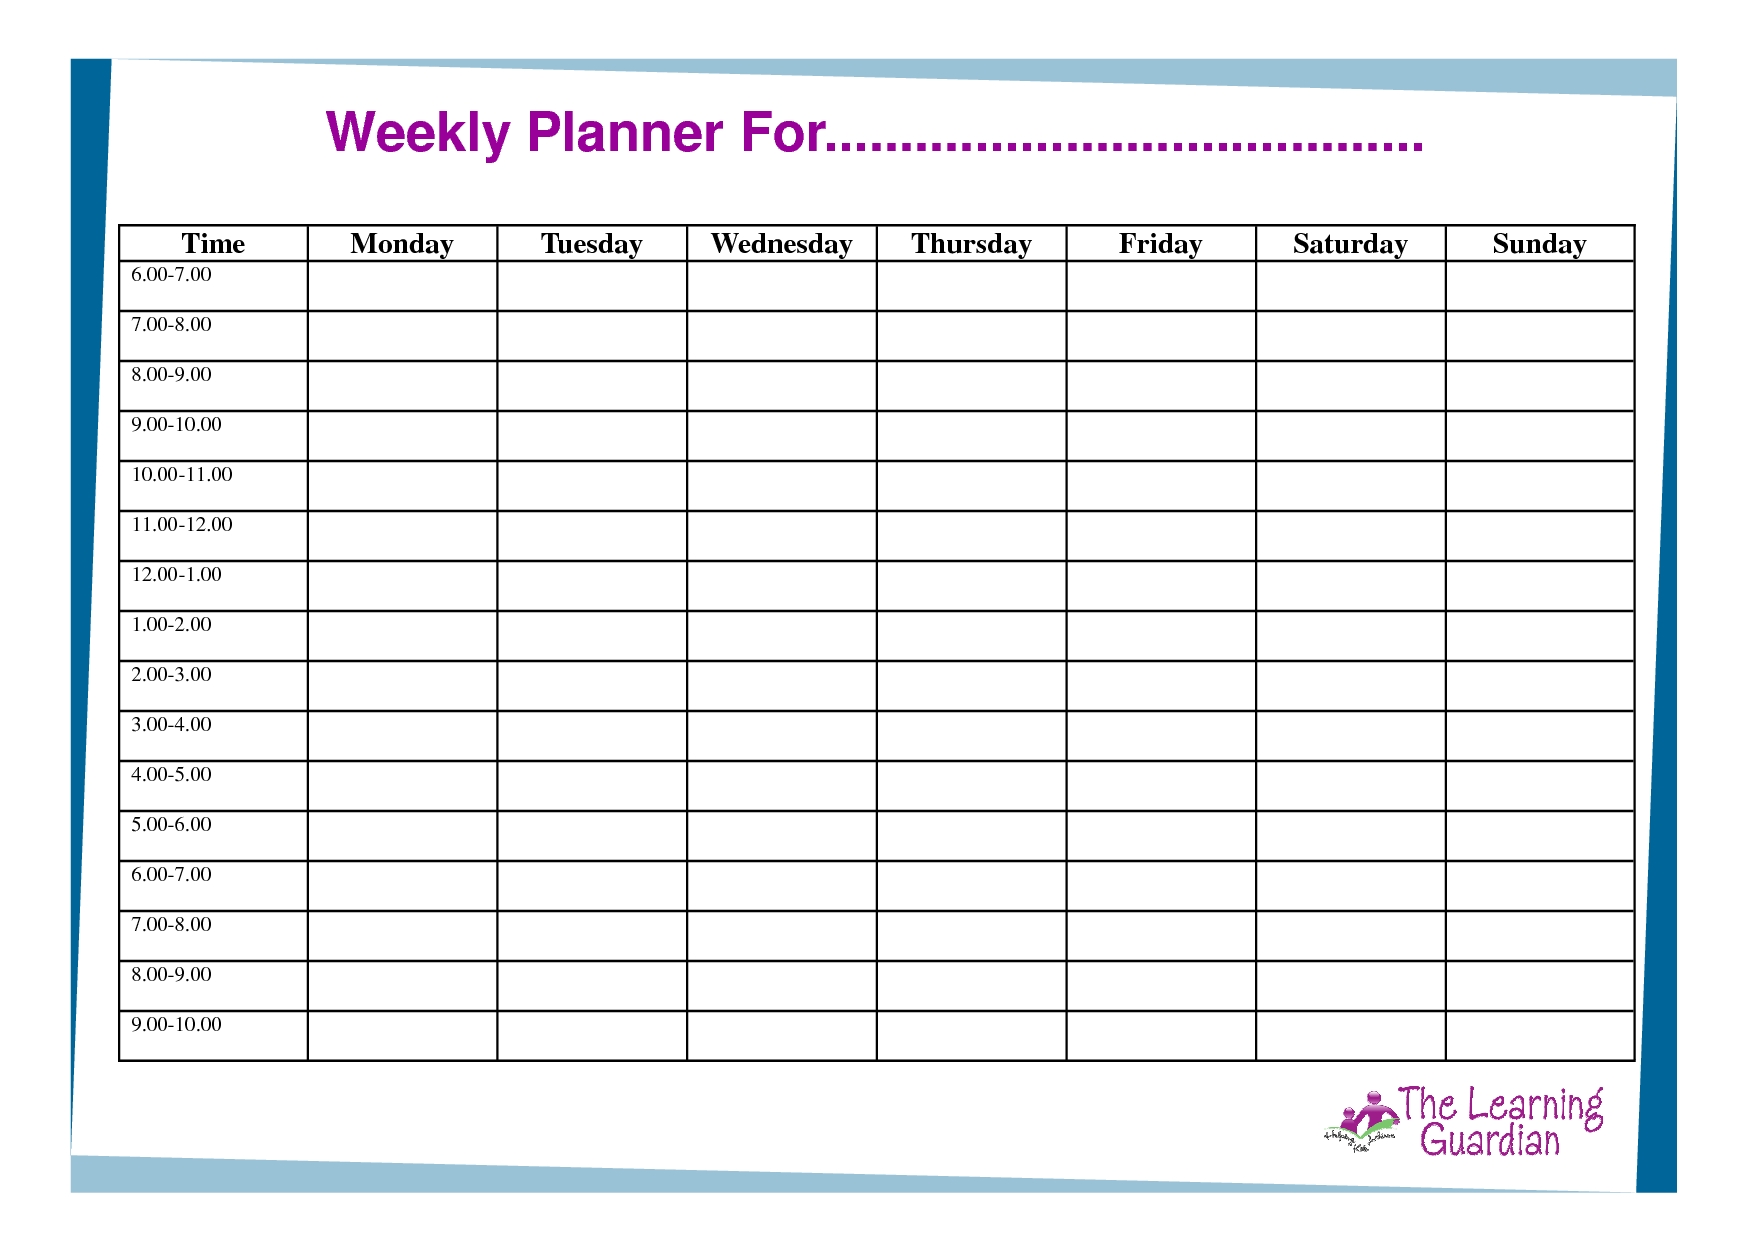 Free Printable Weekly Calendar Templates | Weekly Planner For Time intended for Free Monday Through Friday Calendar Template